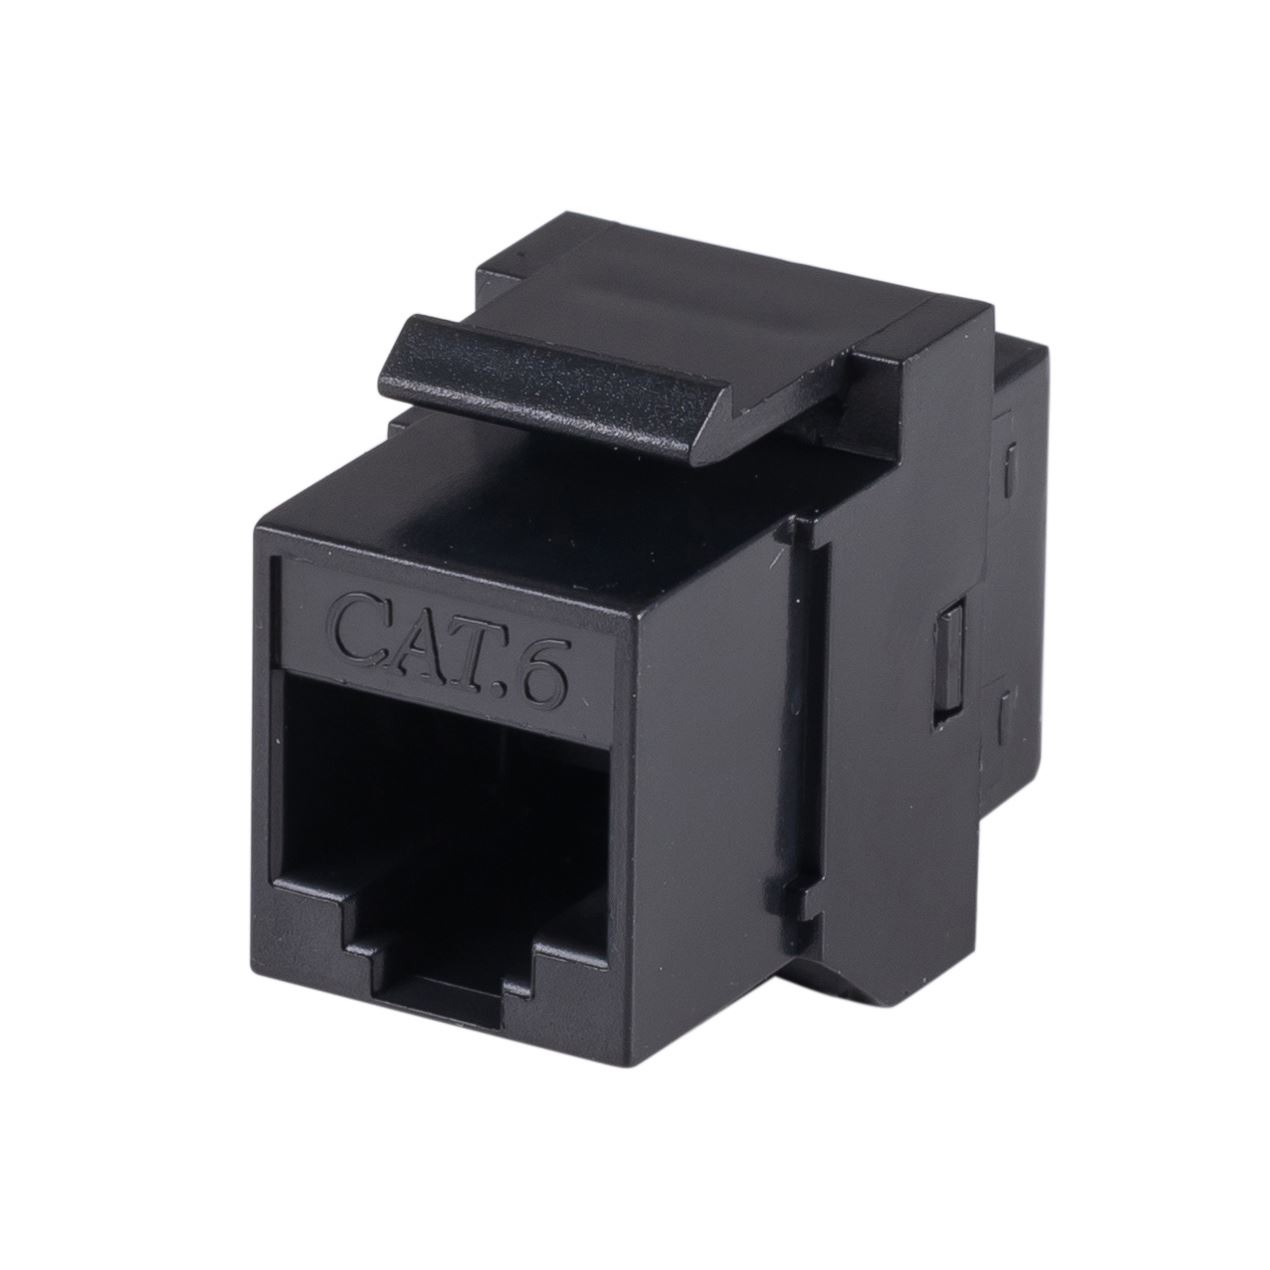 Cat6 Rated RJ45 8C Joiner, 2-Way (2x RJ45 Sockets)